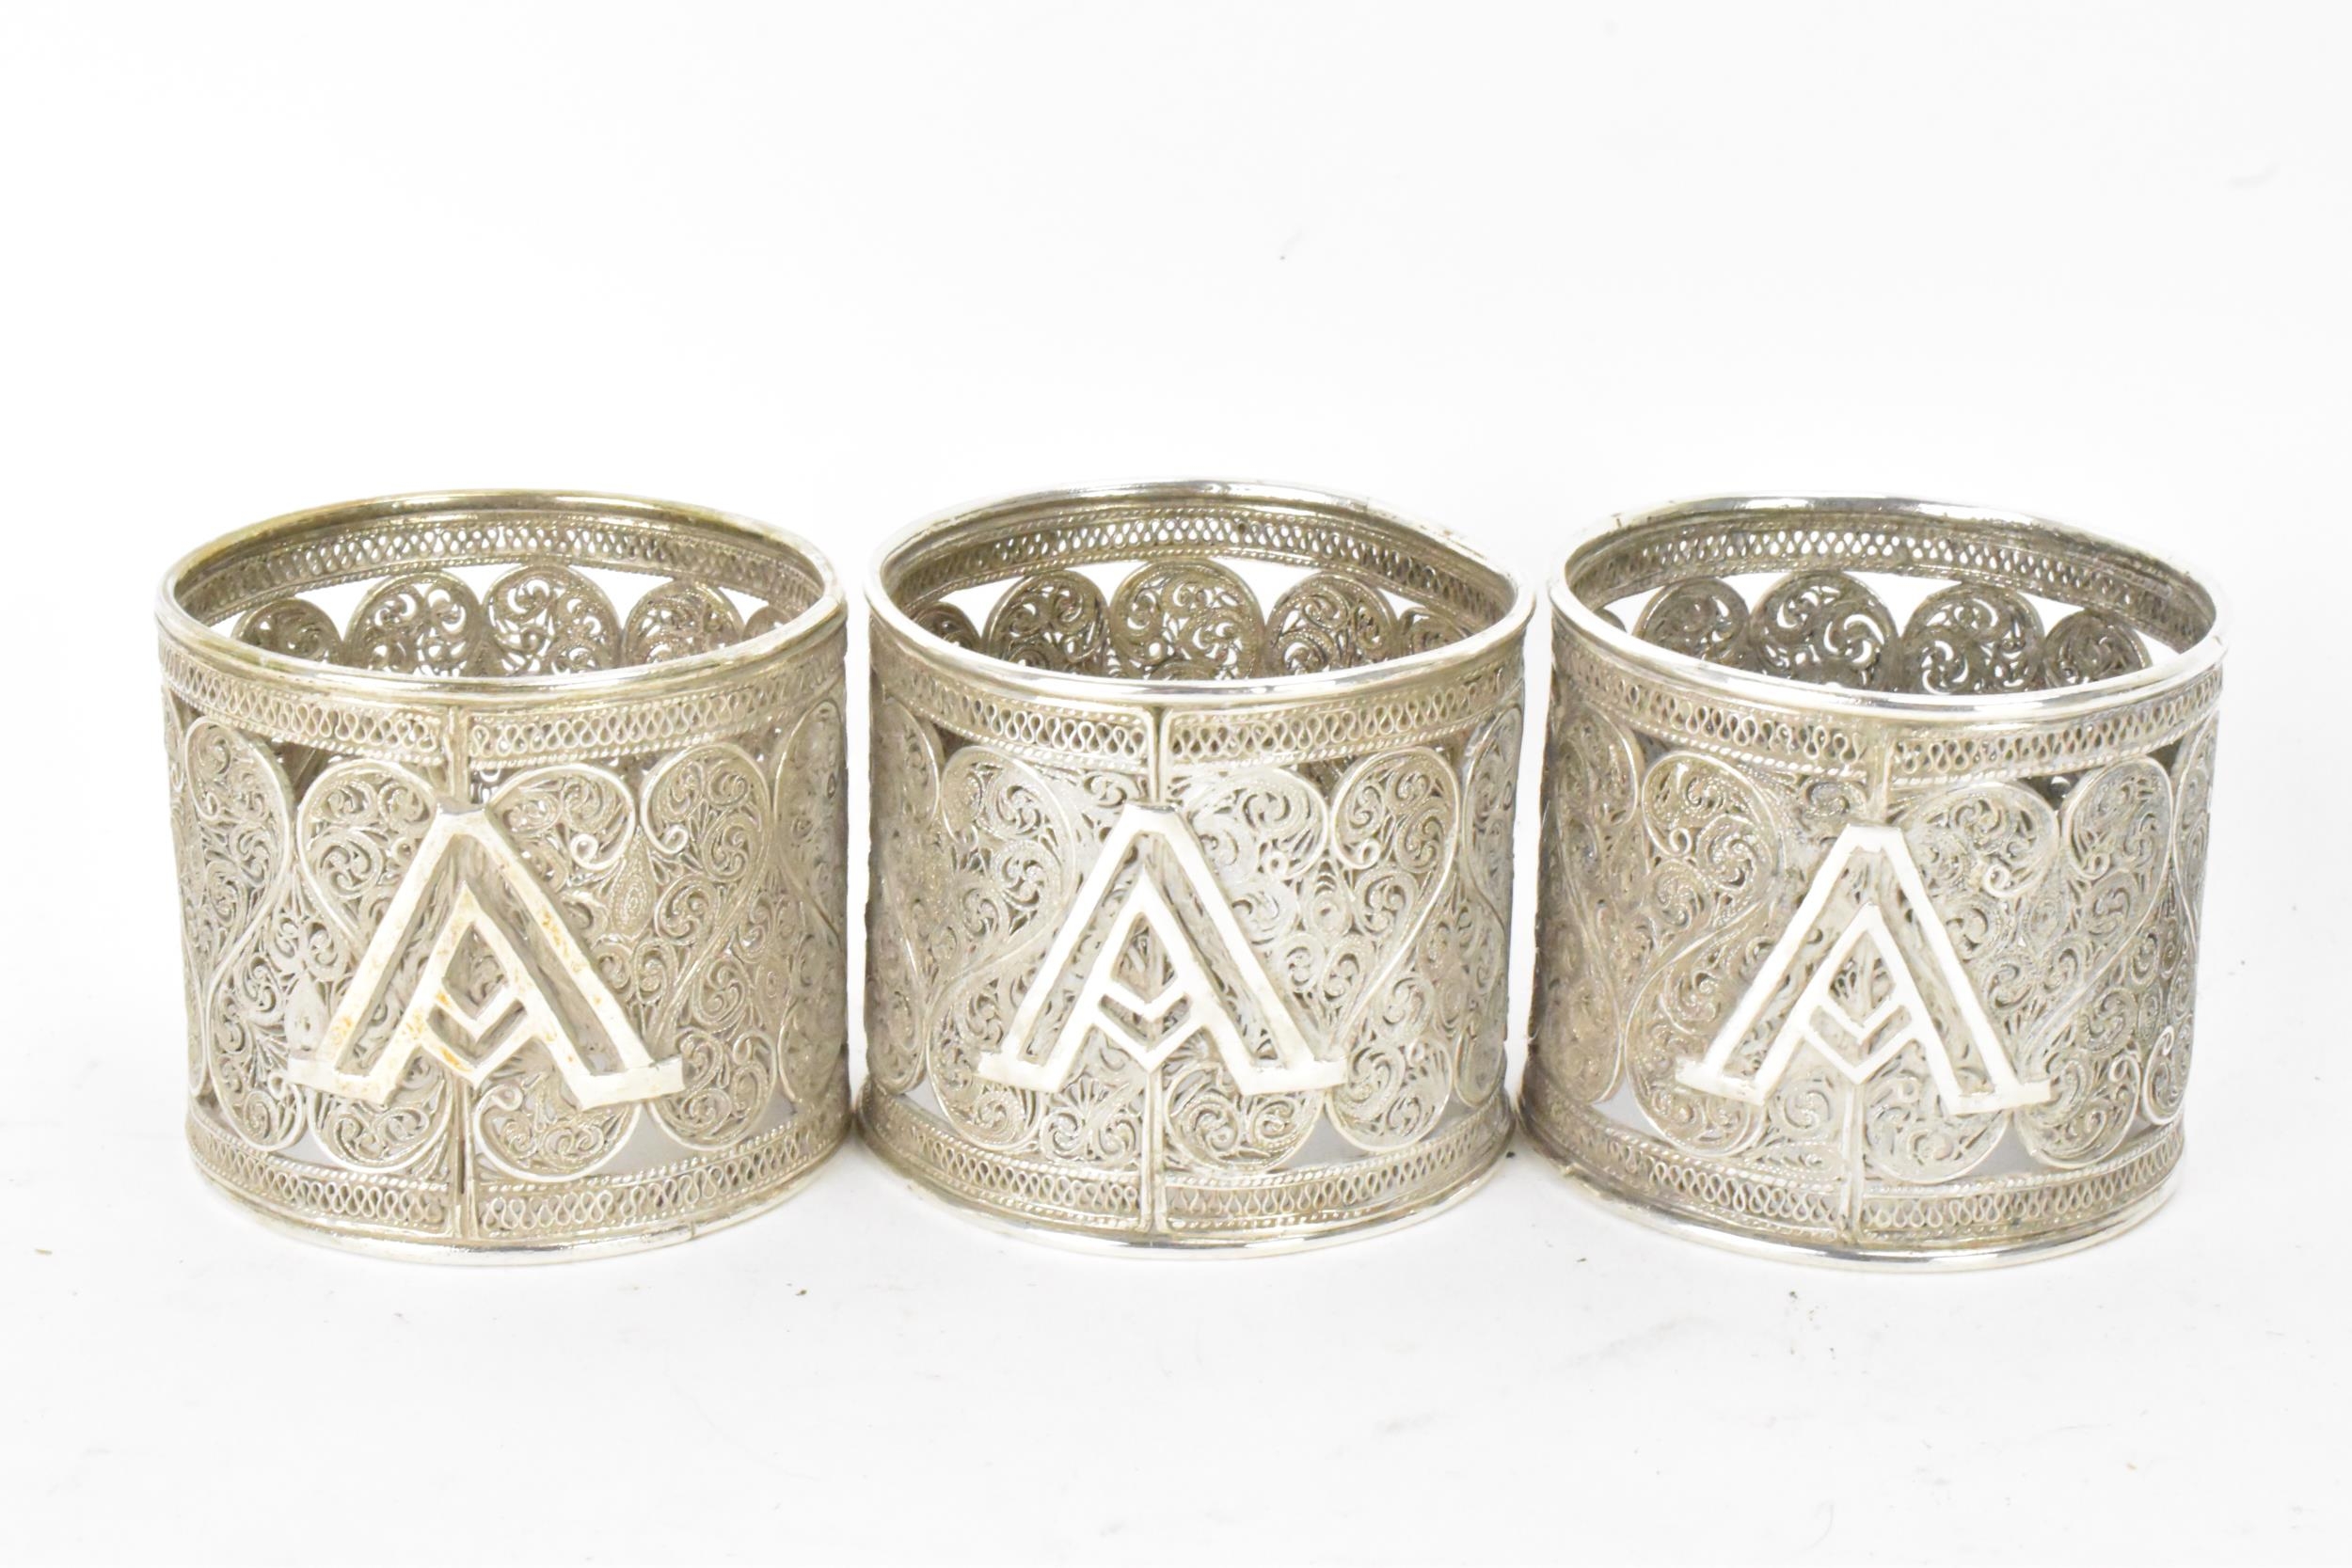 A set of six early 20th century Middle Eastern white metal filigree napkin rings, elaborately - Image 3 of 6